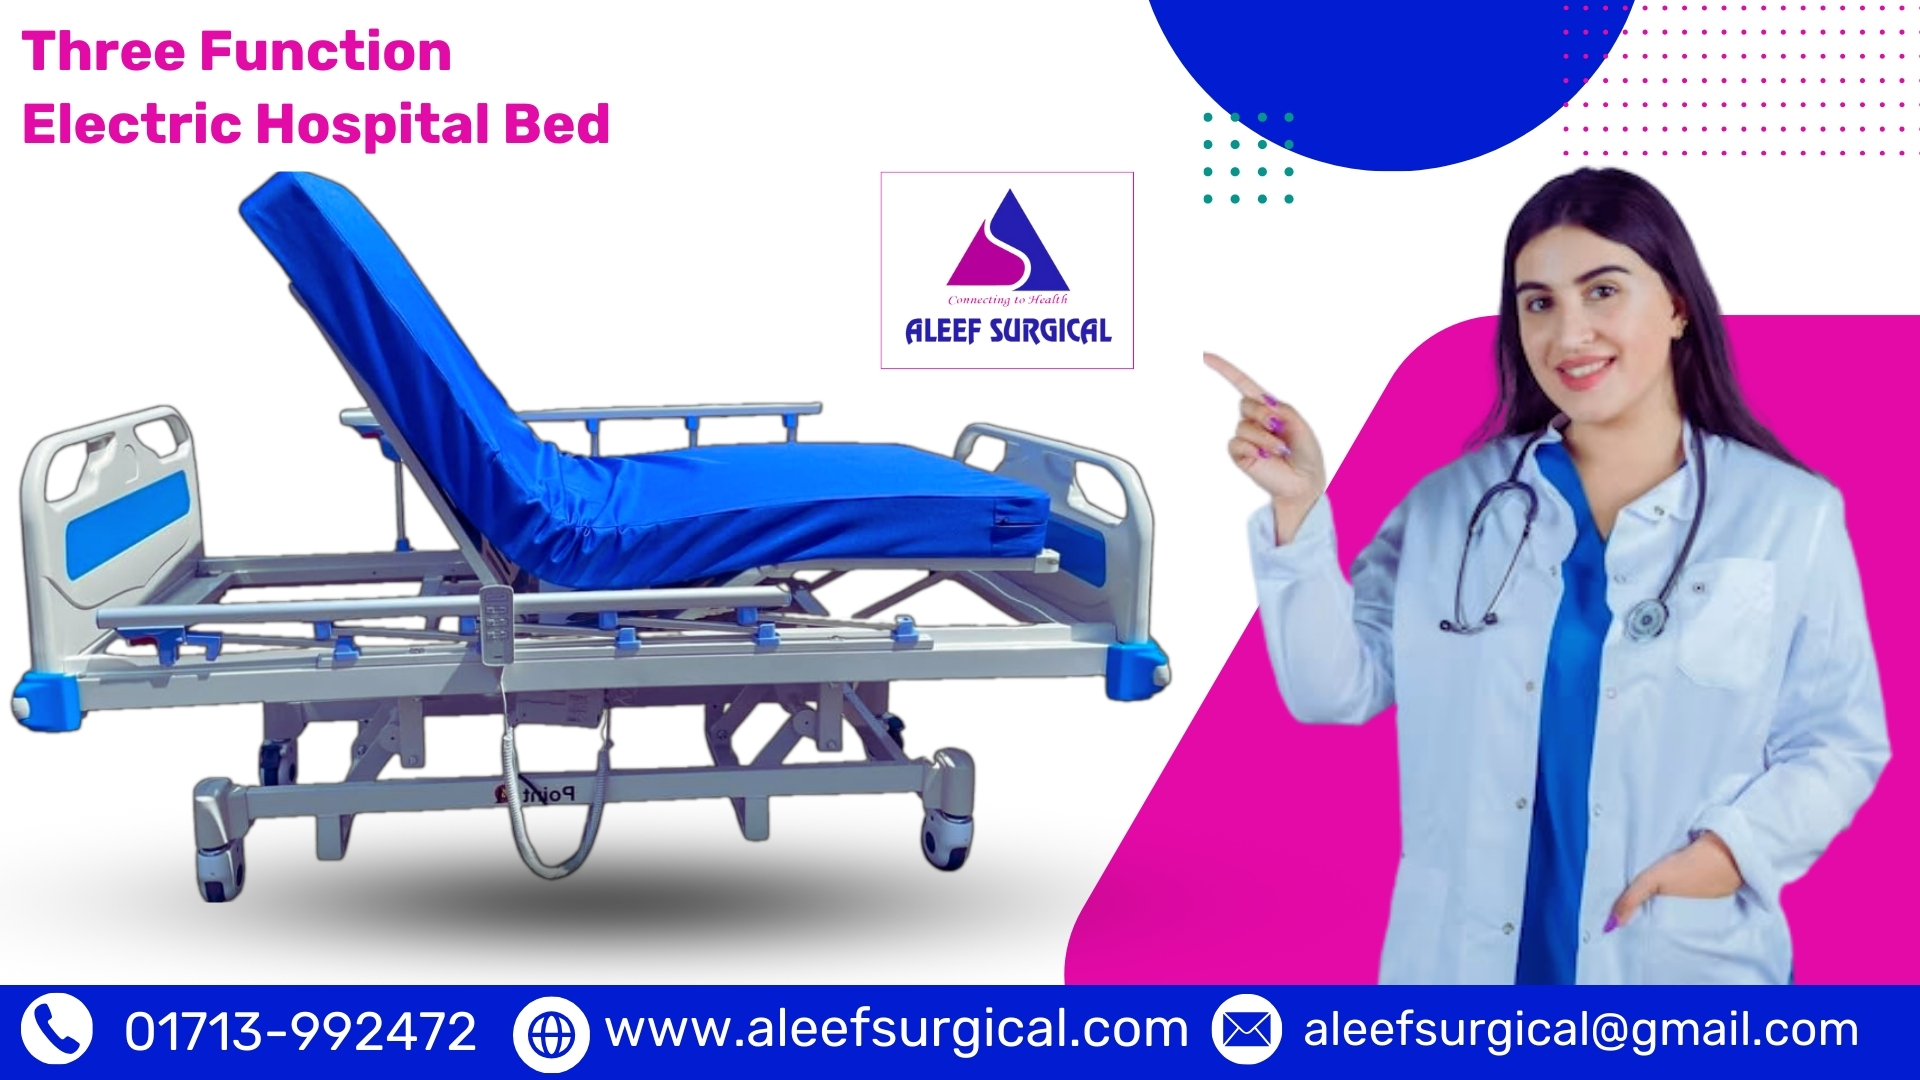 Electric Hospital Beds Supplier in BD. Image of Electric Hospital Bed 